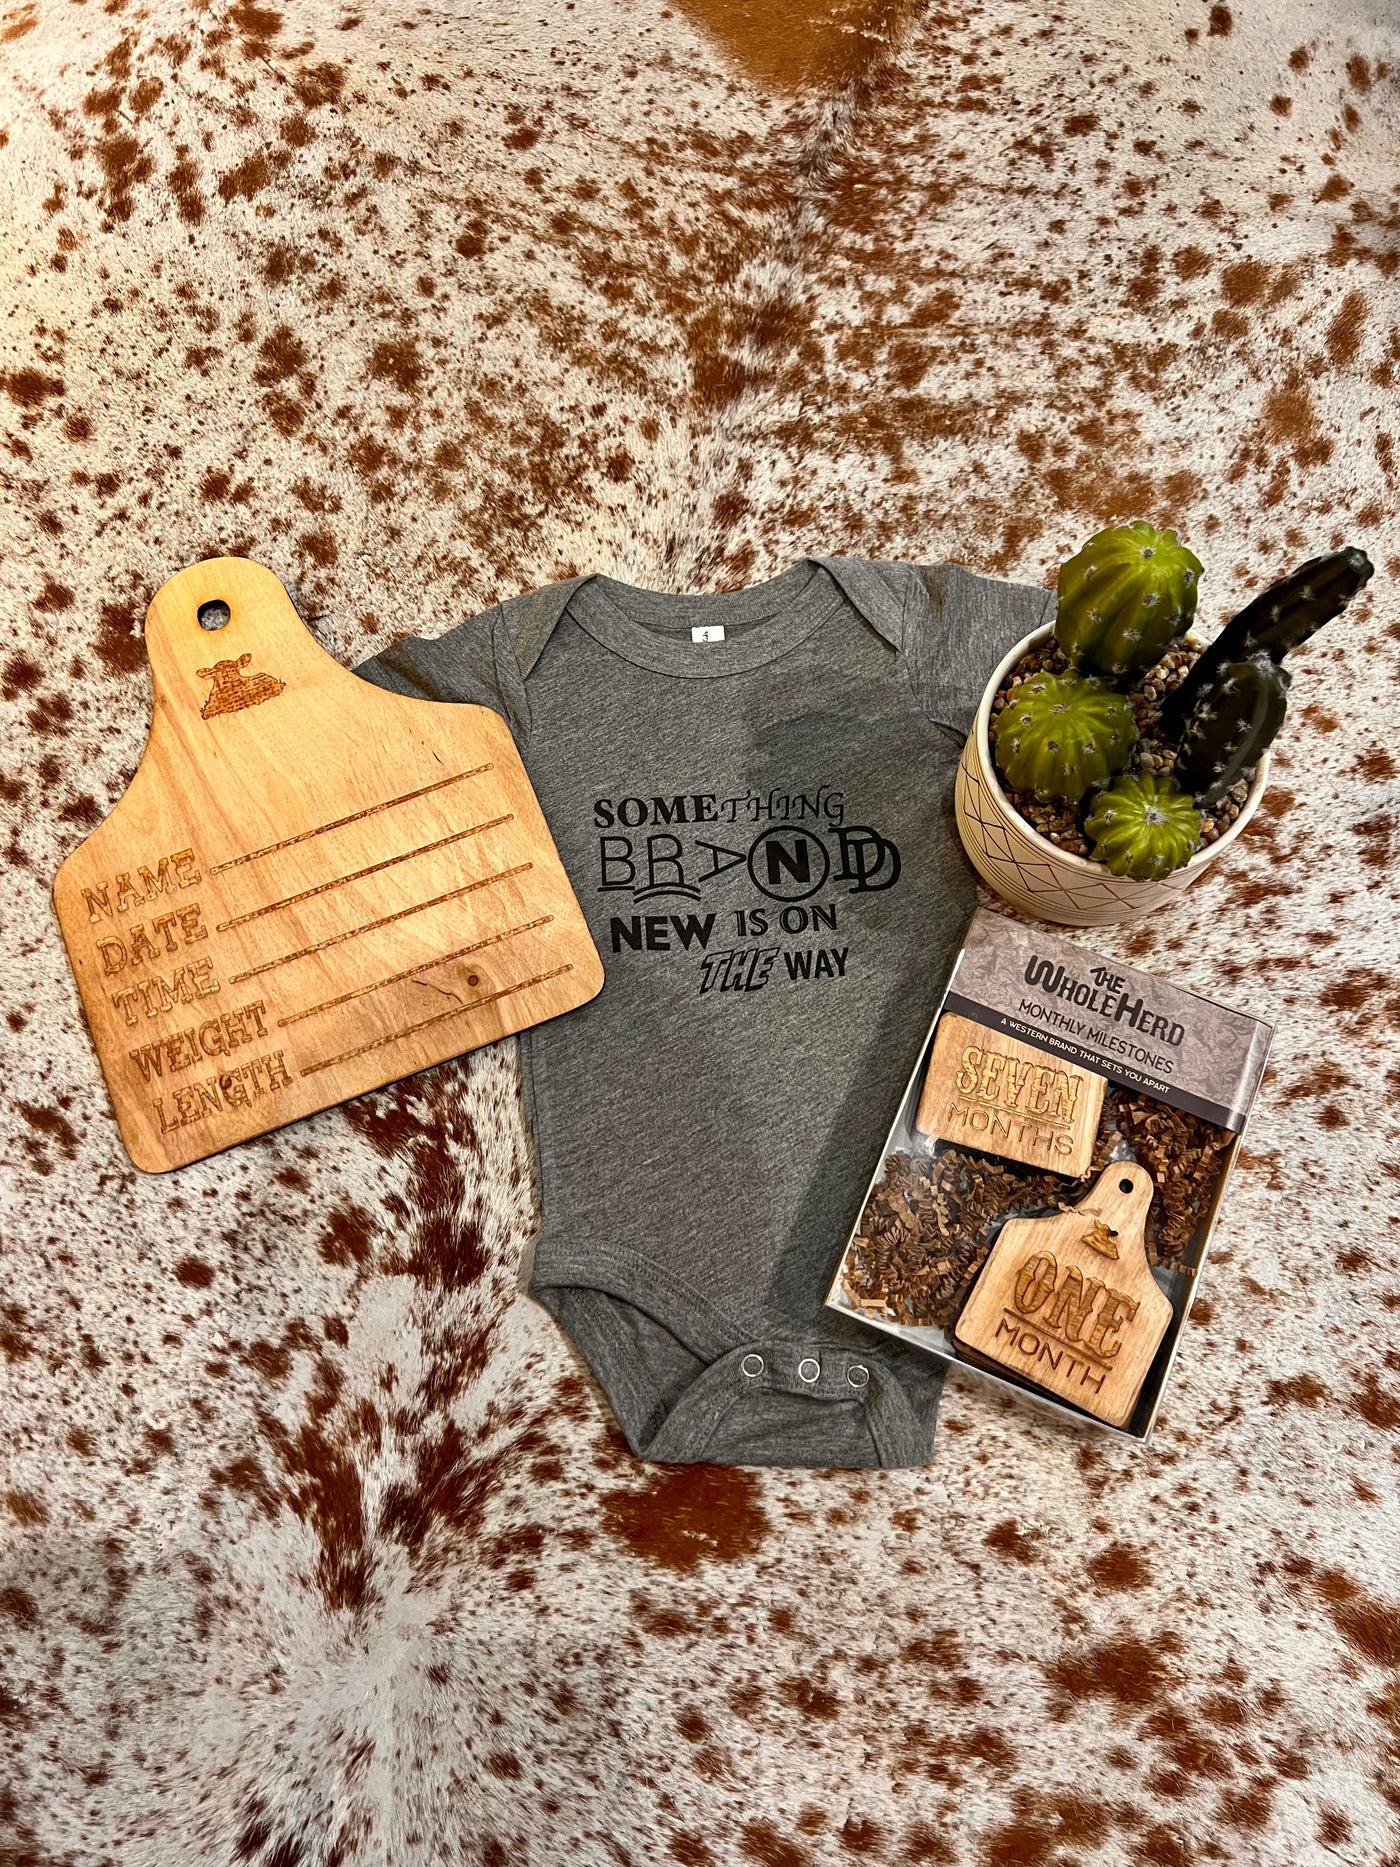 The Whole Herd Baby Announcement Ear Tag